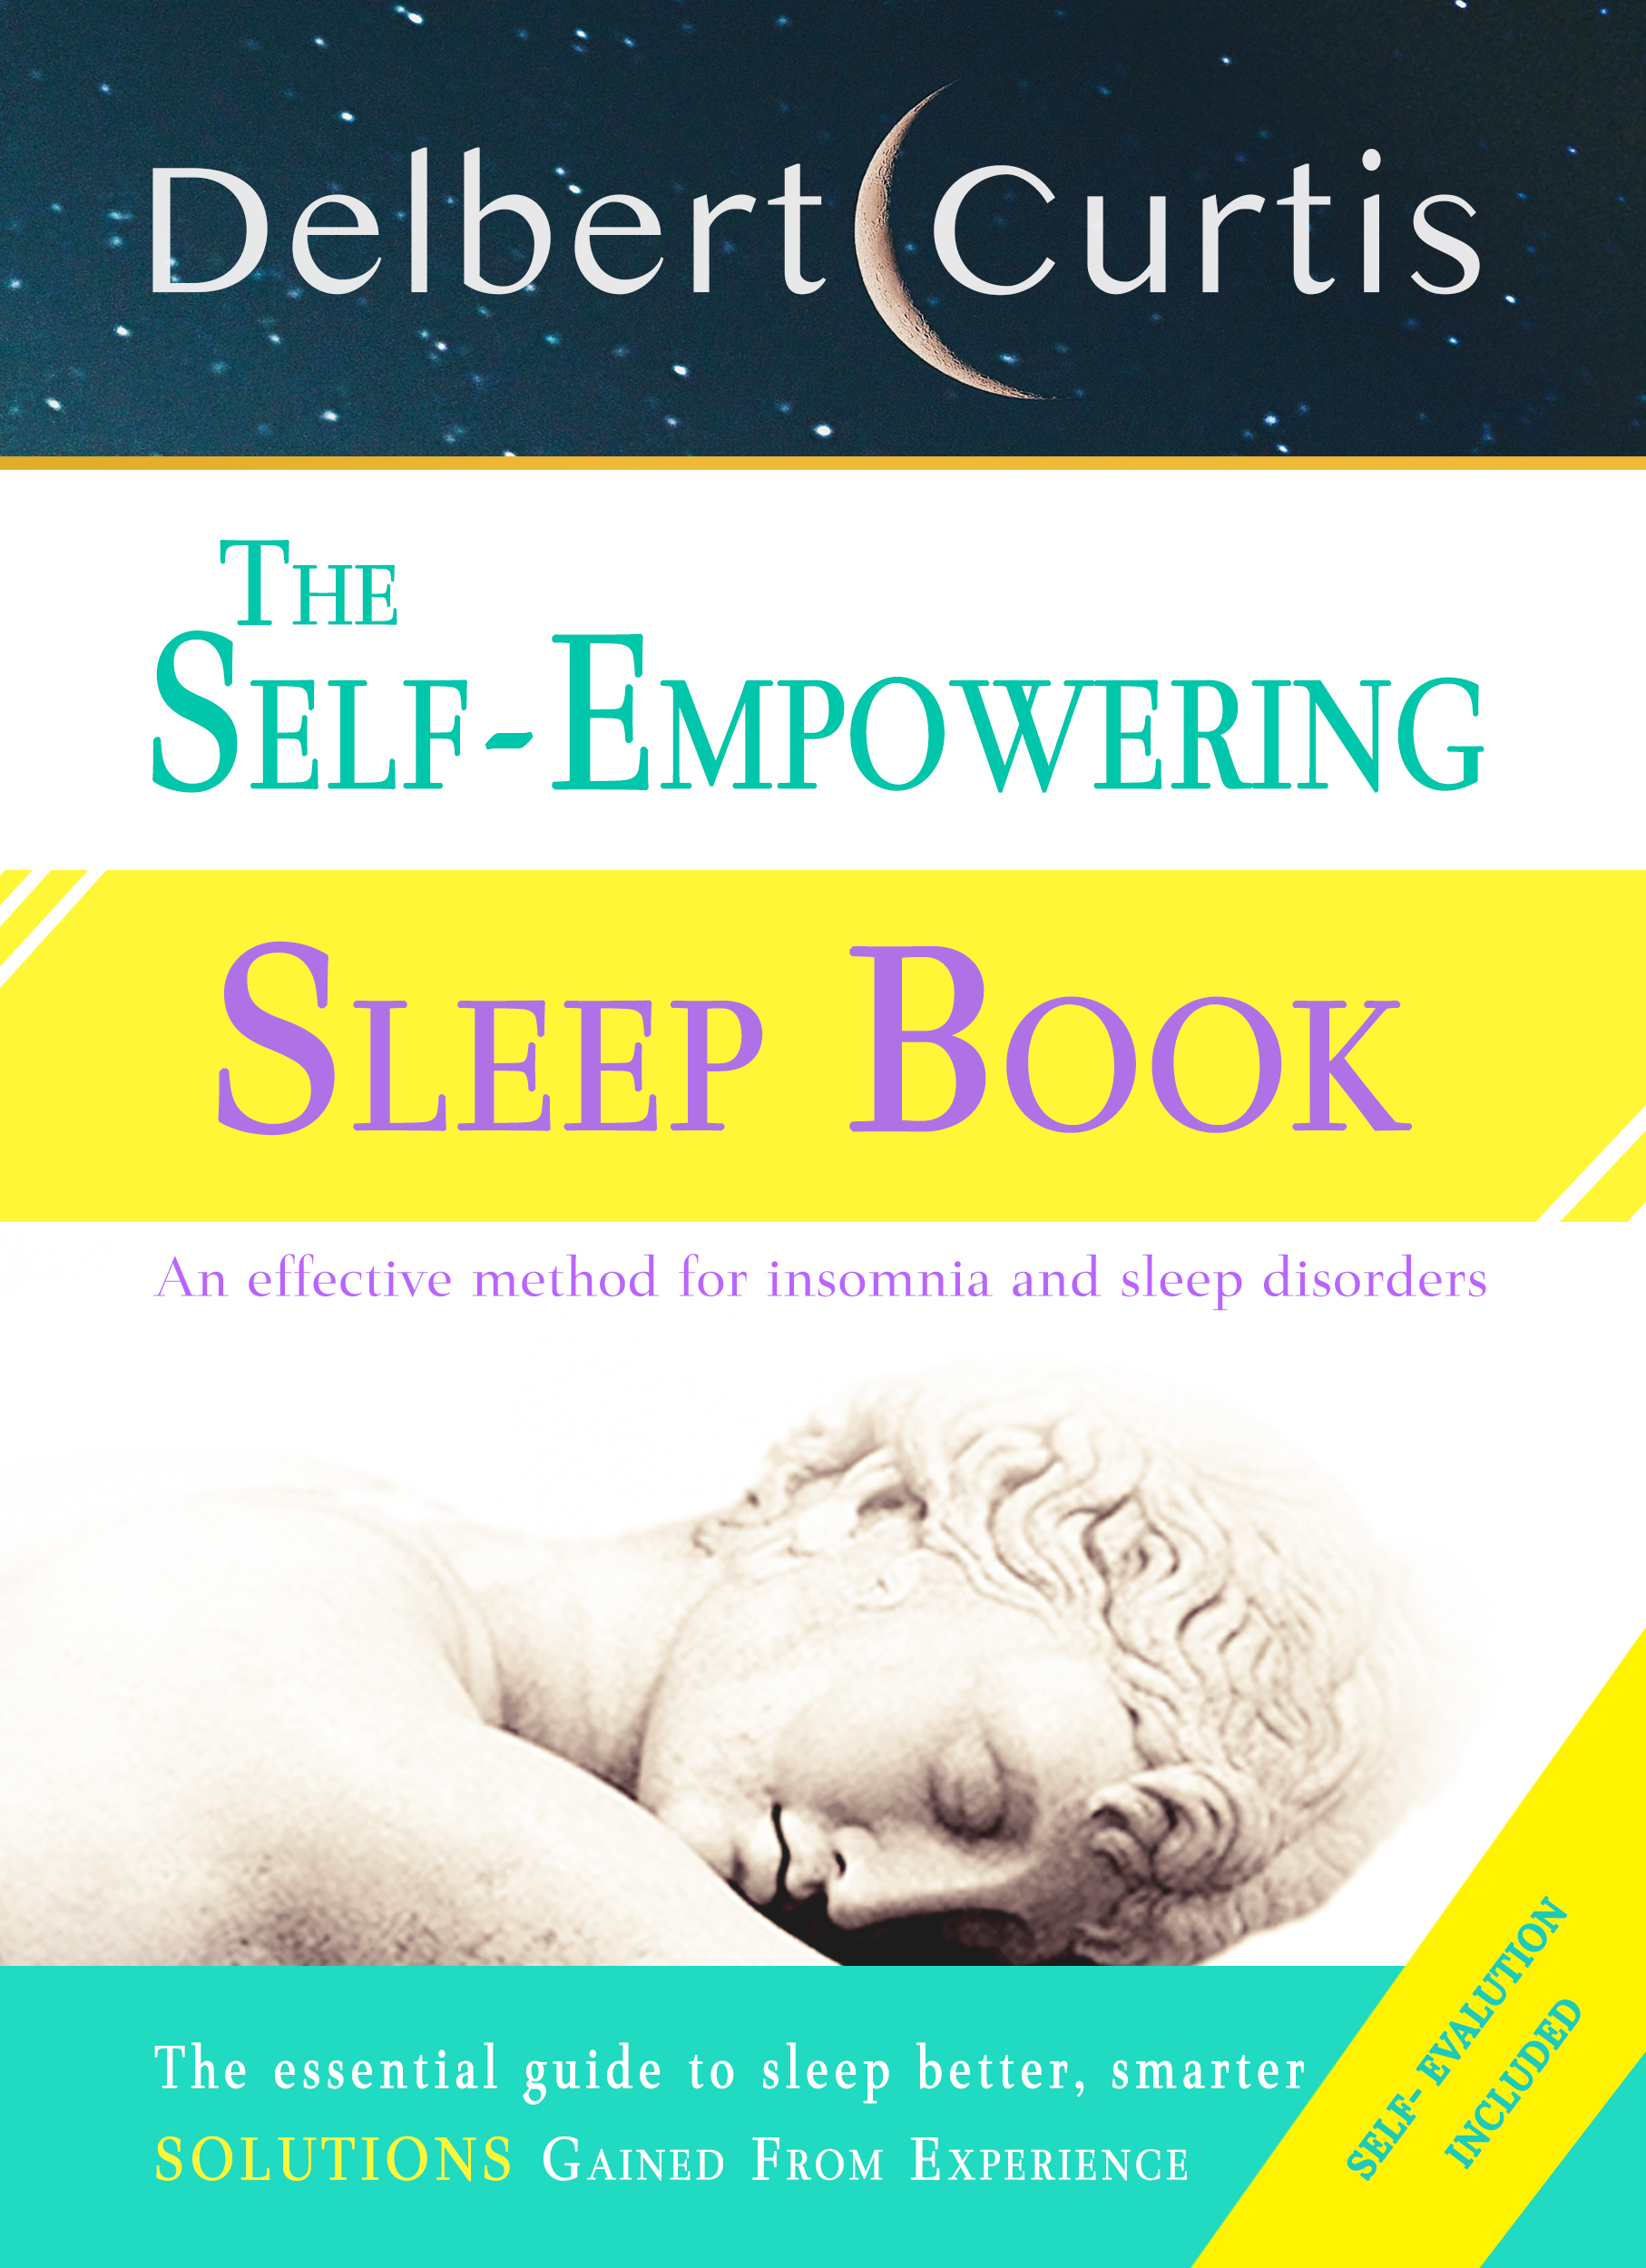 FREE: The Self-Empowering Sleep Book by Delbert Curtis